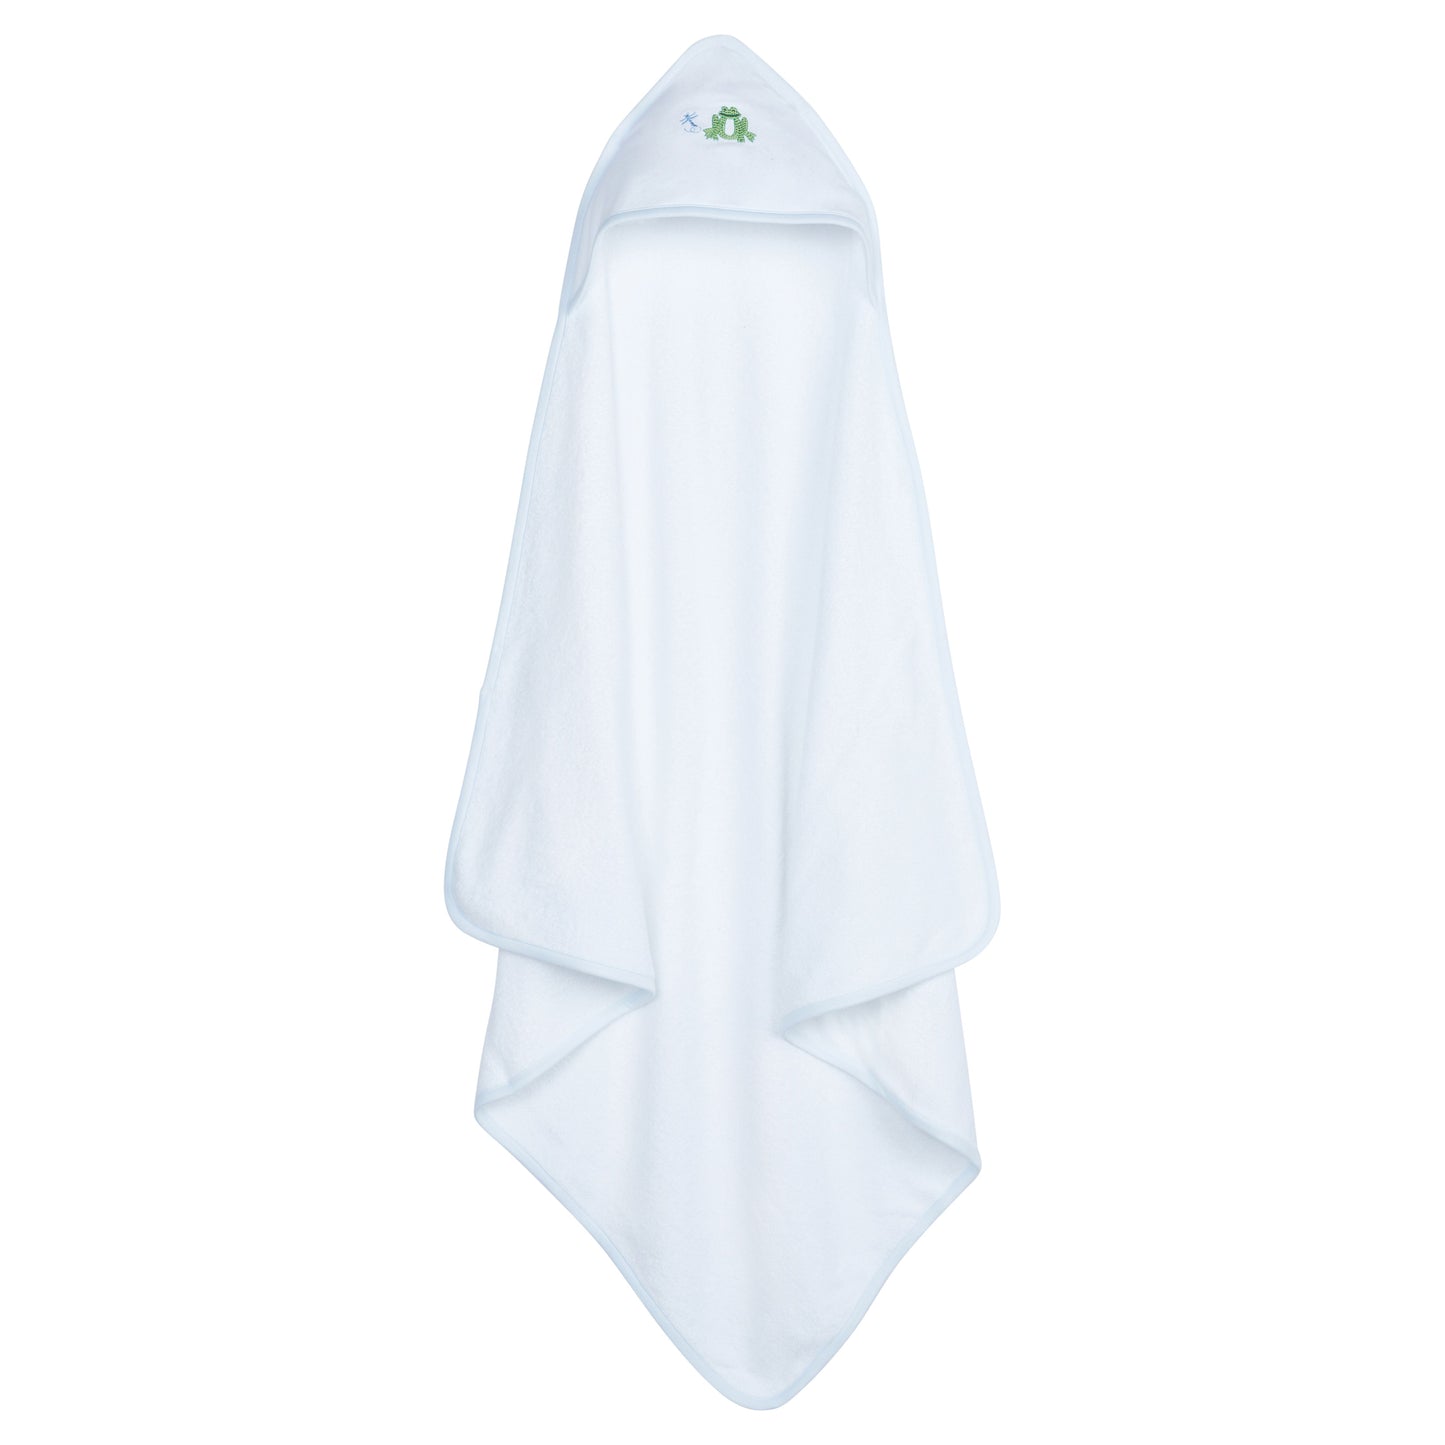 Little English Hooded Towel - Blue Frog